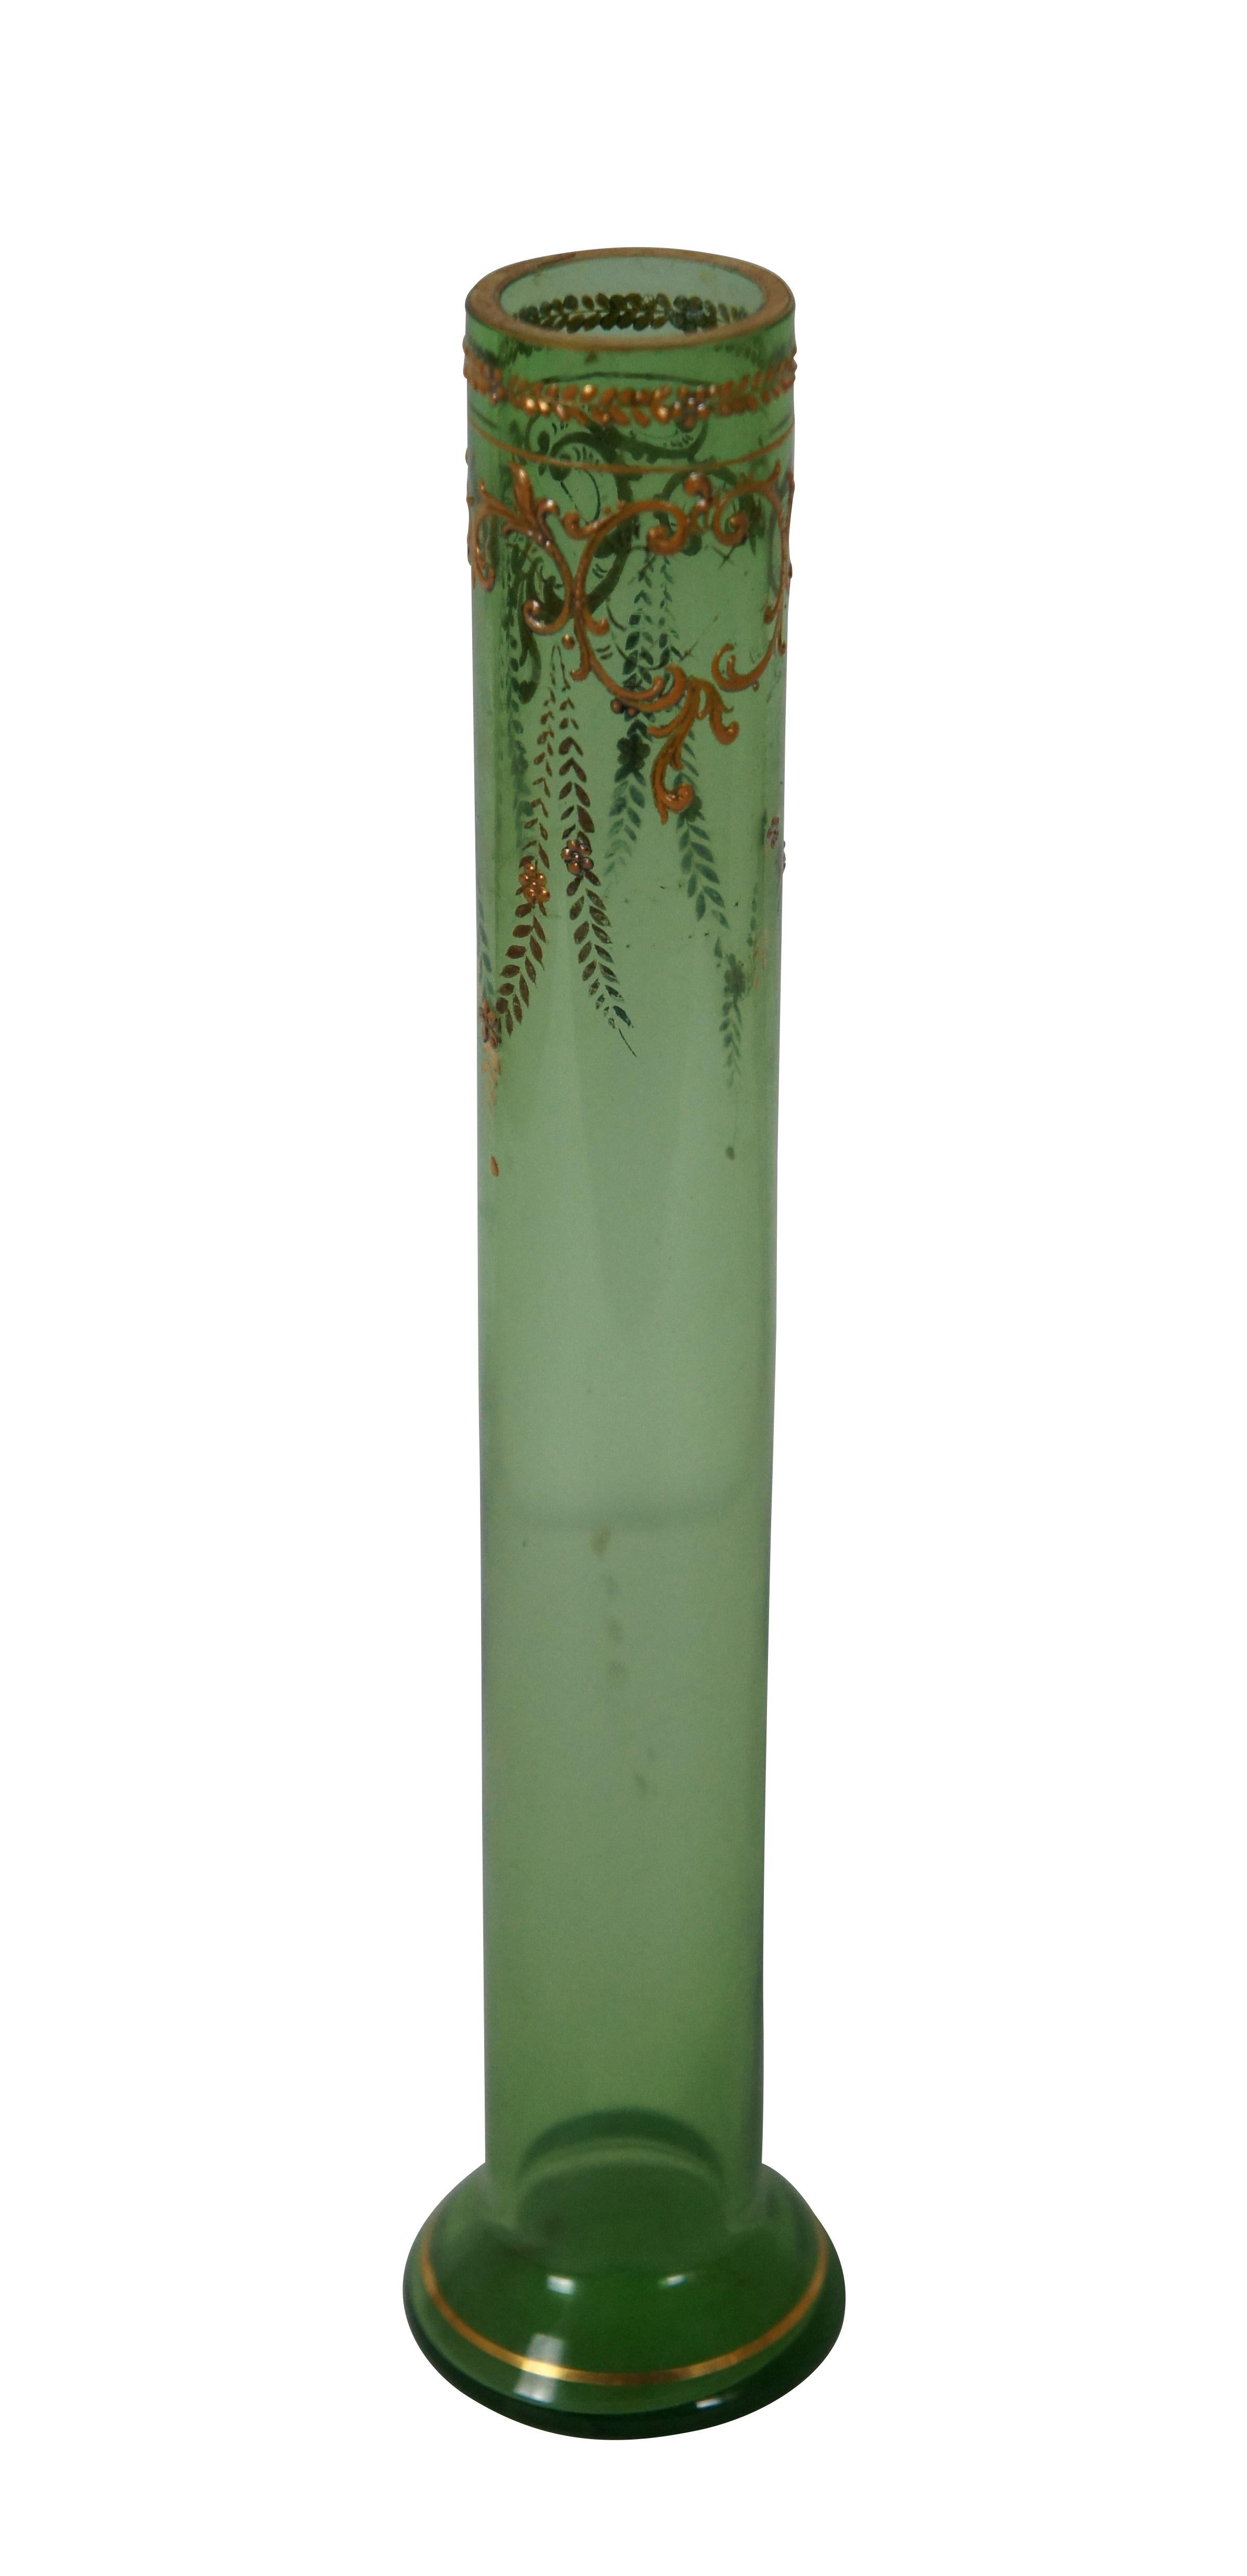 Antique Moser Karlsbad Bohemian Czech art glass bud vase featuring a tubular design with enameled gold gilt accents of florals and swags.


Dimensions:
2.25” x 10.375” (Diameter x Height)
